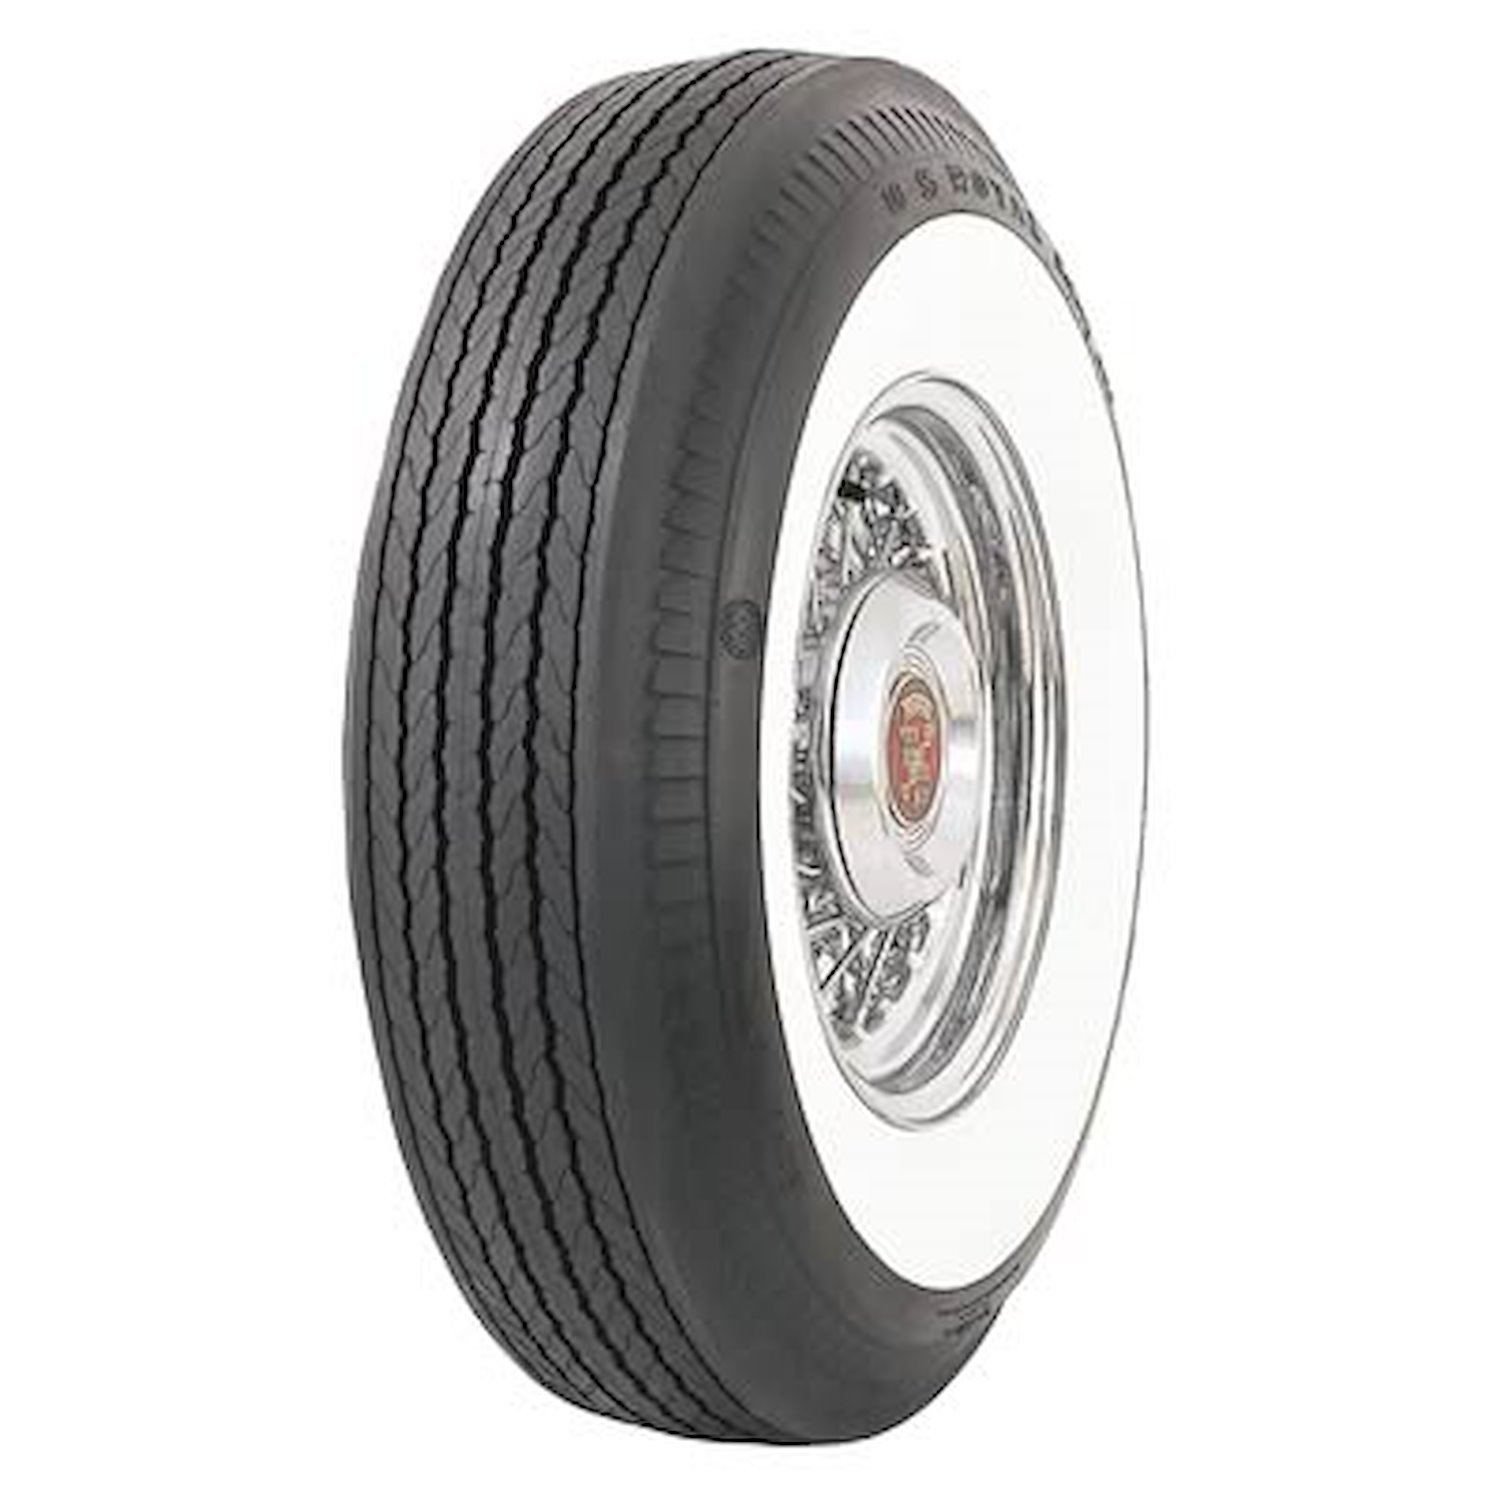 61991 Tire, US Royal 2.75-Inch Whitewall, 820-15